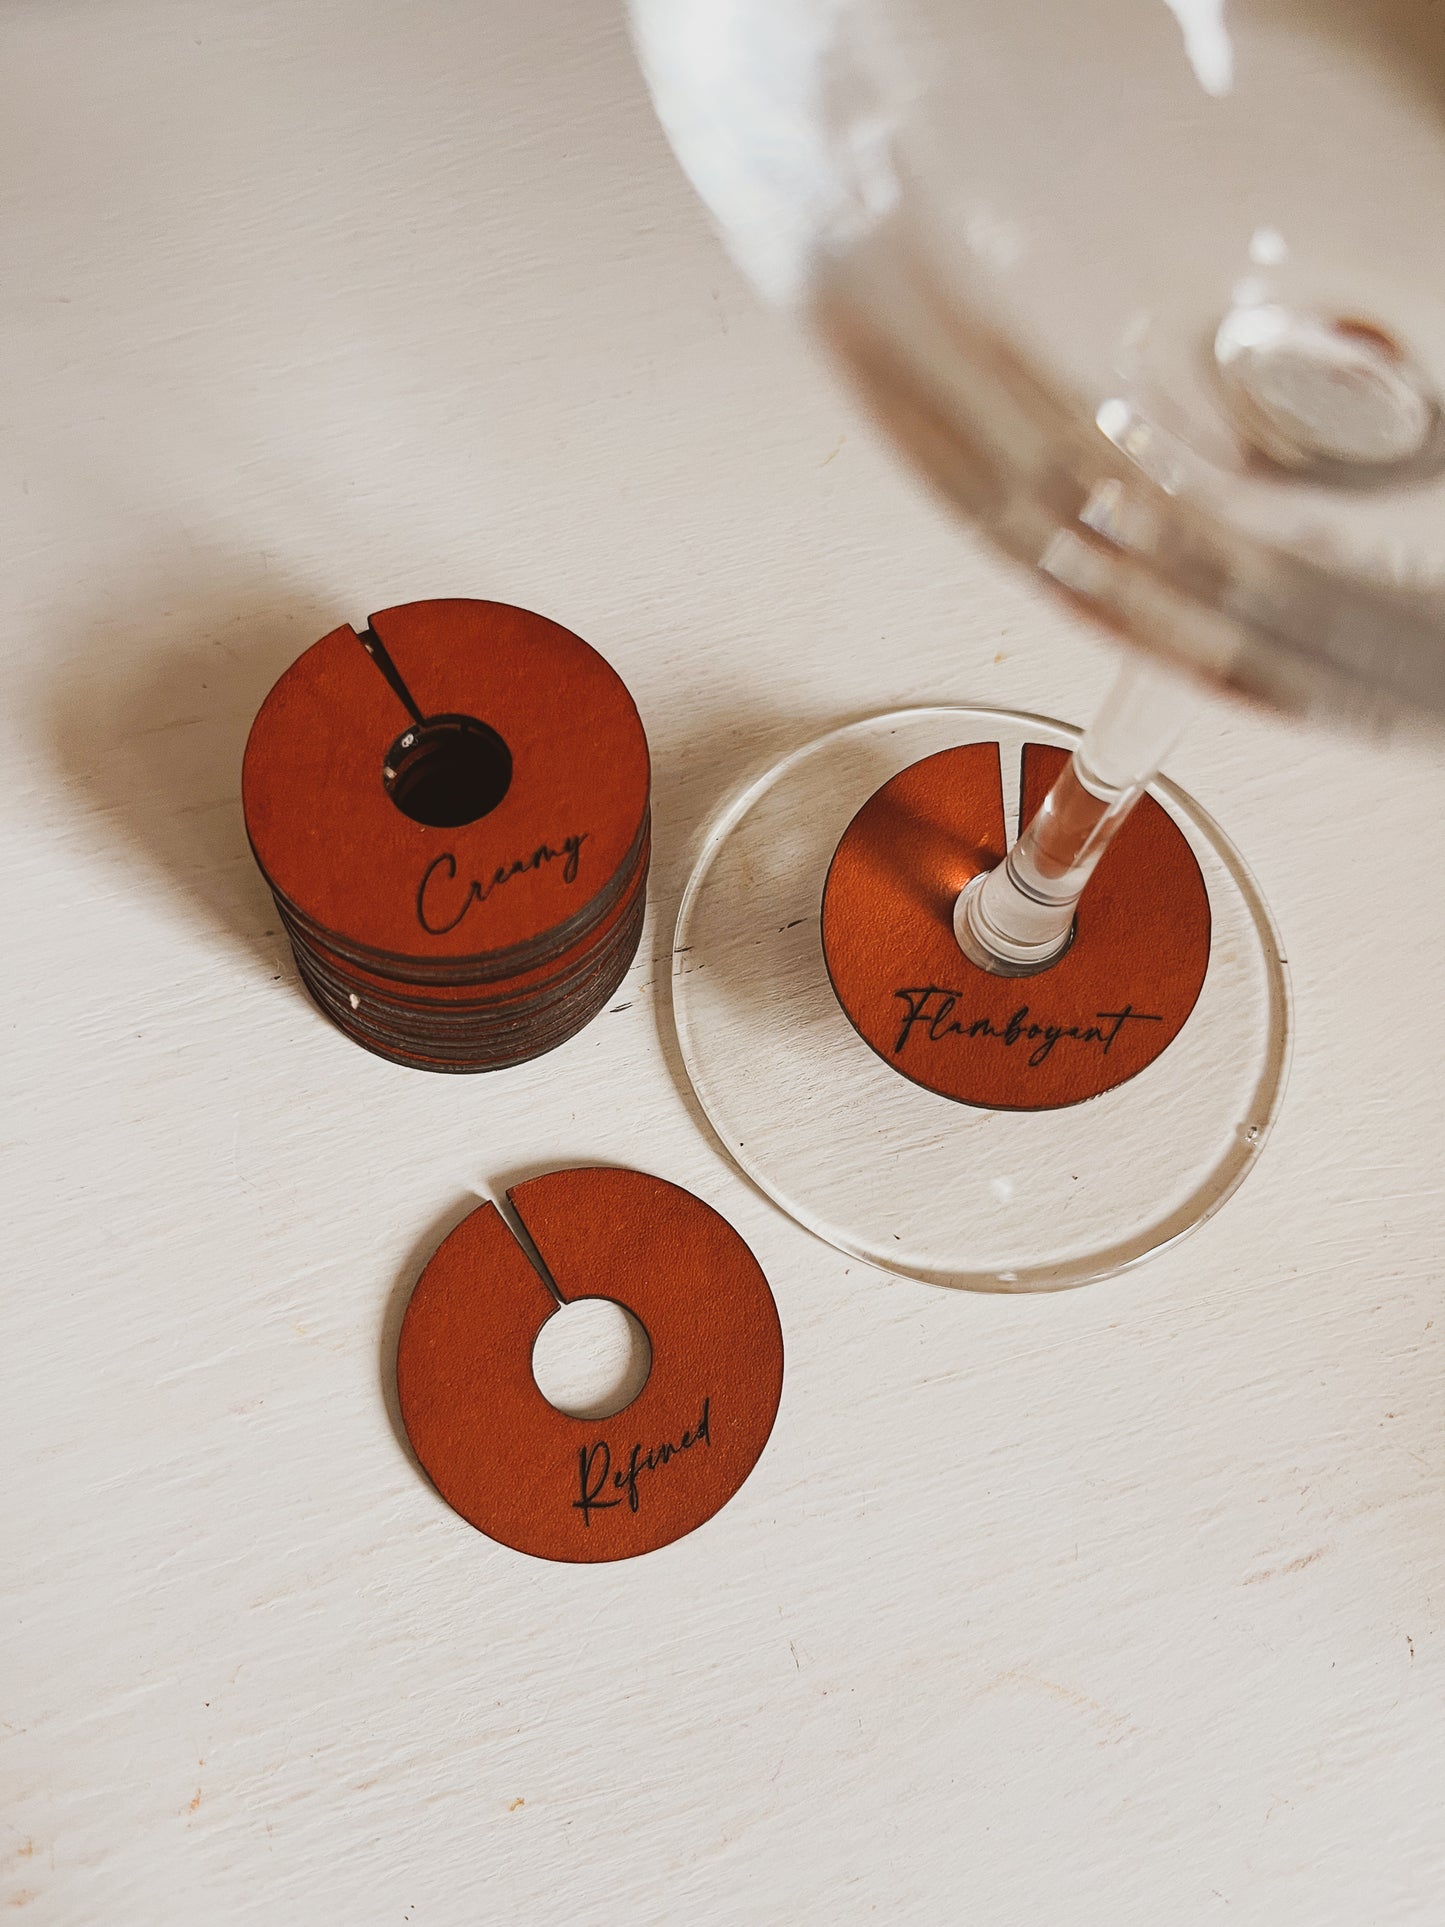 Wine Charm Sets, Name Tag for Glasses with Stems